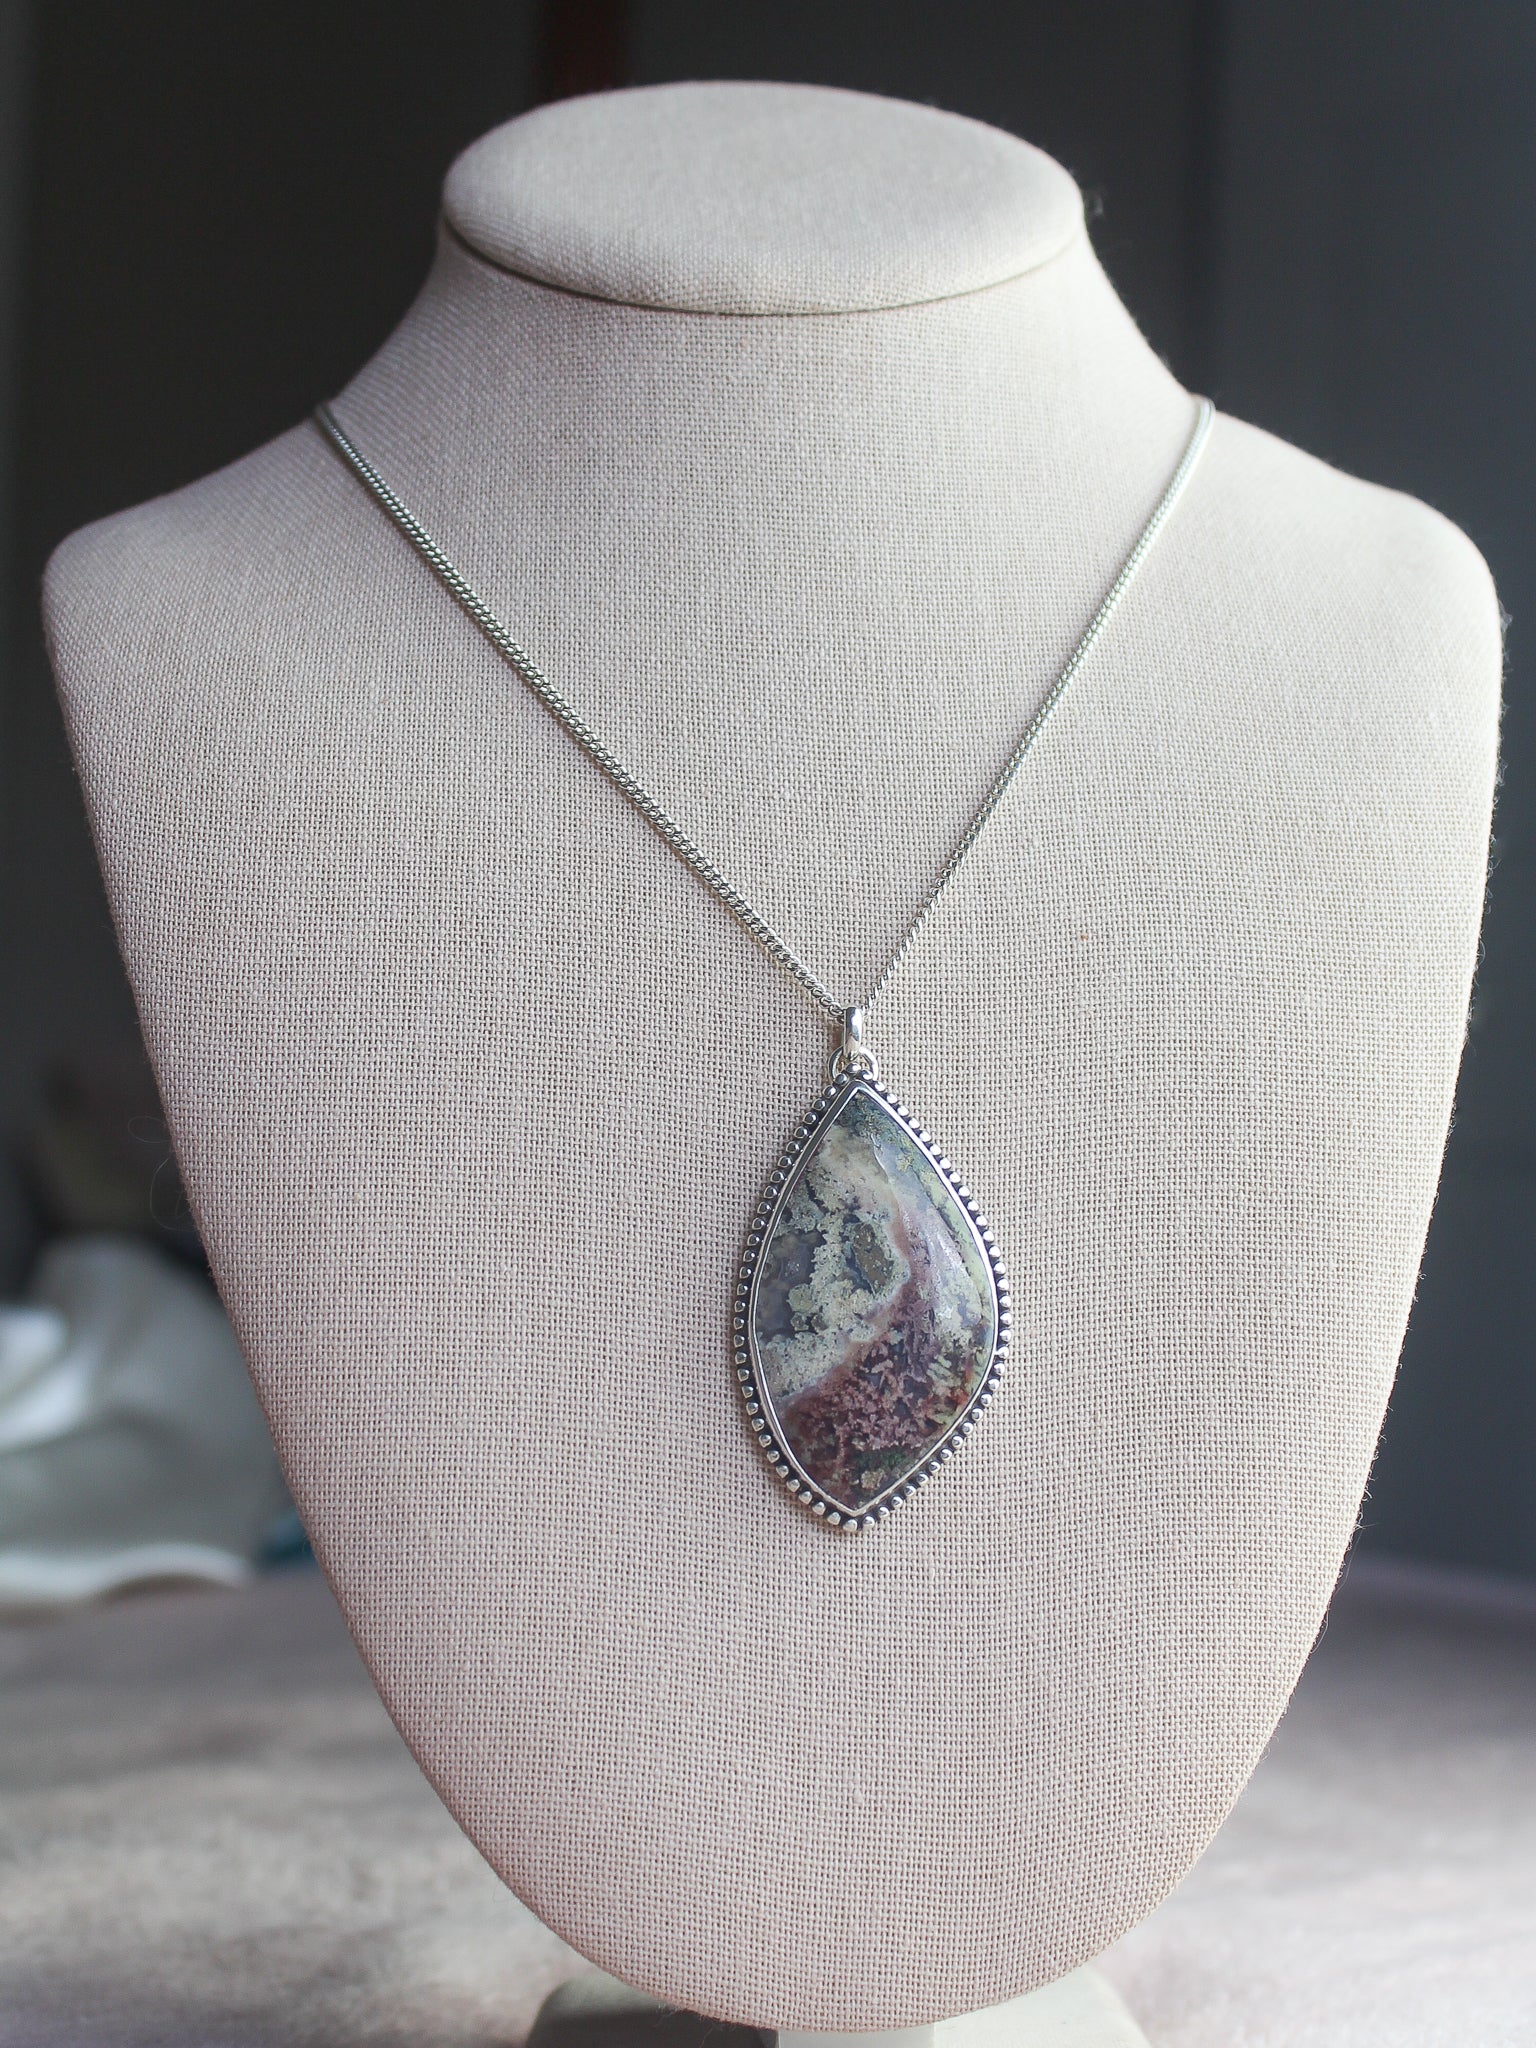 Handmade 925 sterling silver pendant with a unique moss agate stone lily and William jewelry